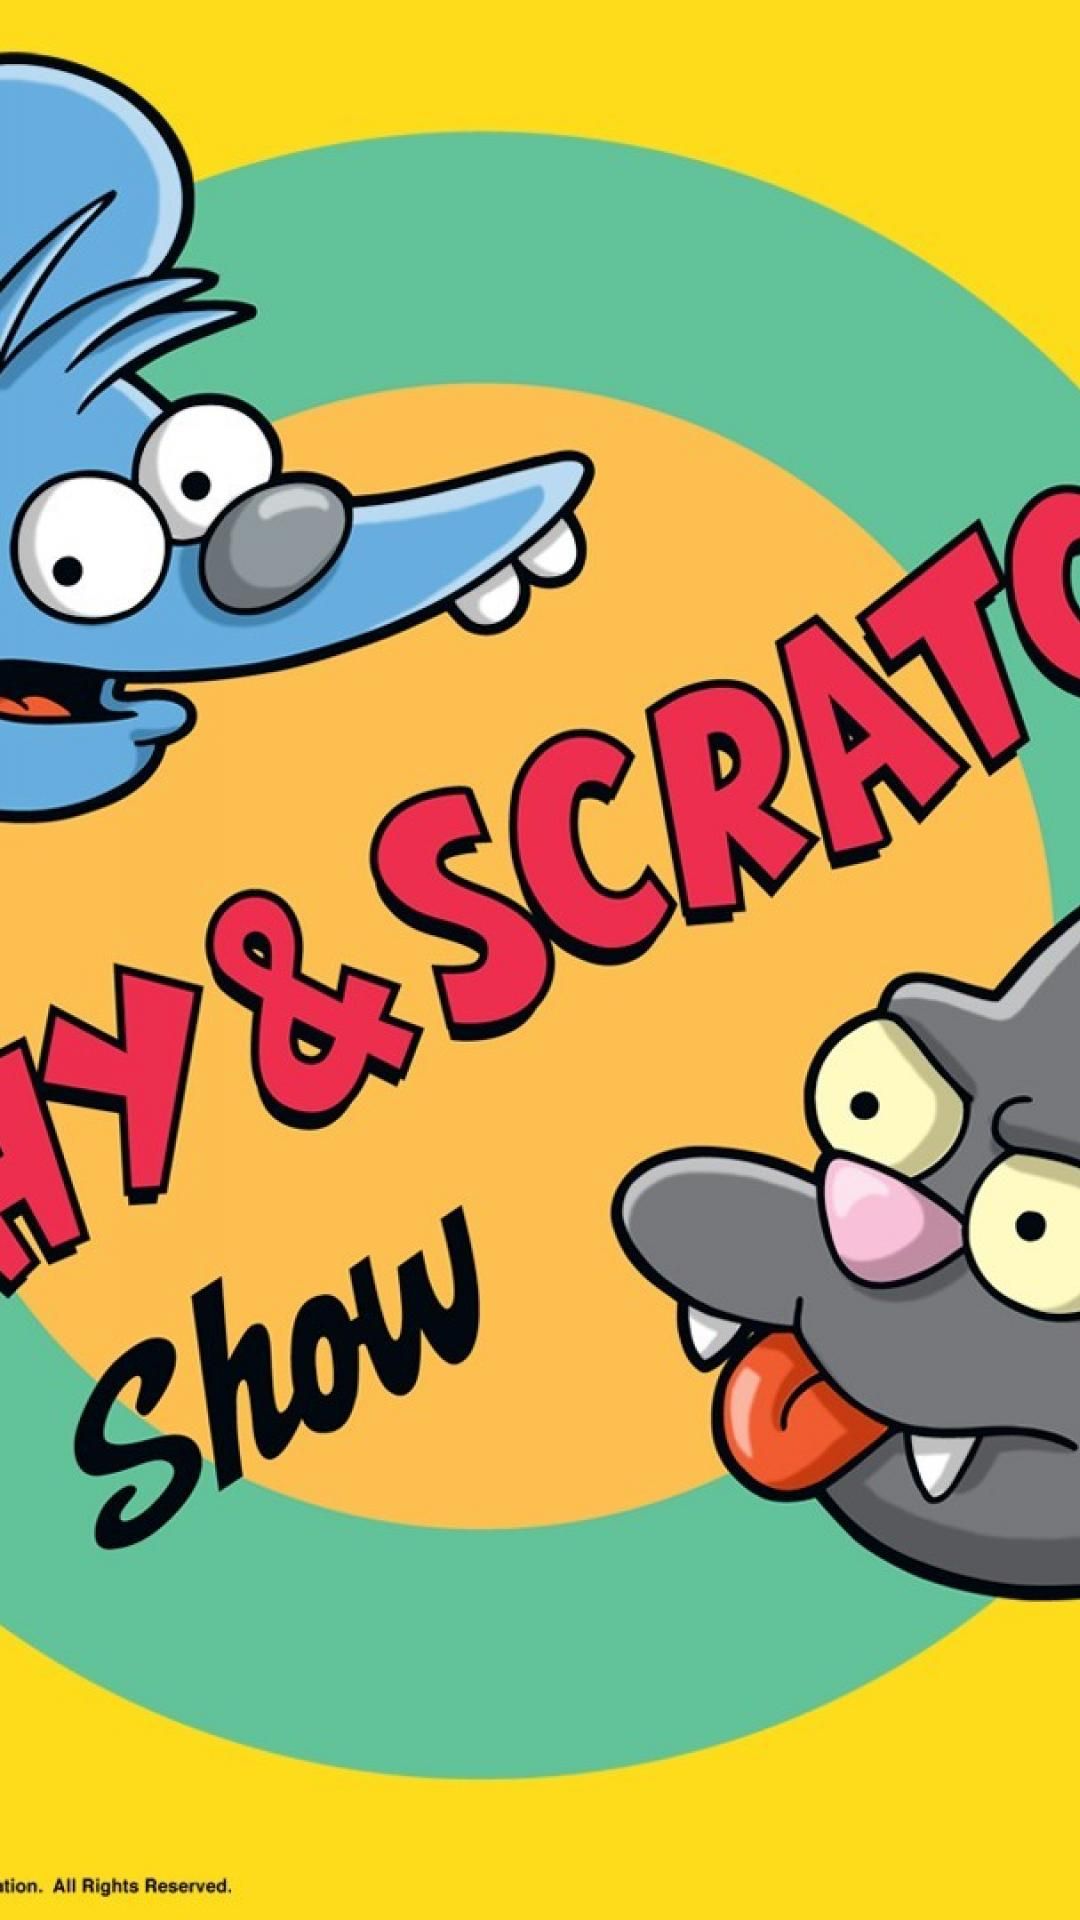 Scratchy Wallpaper. Scratchy Wallpaper, Scratchy Background and